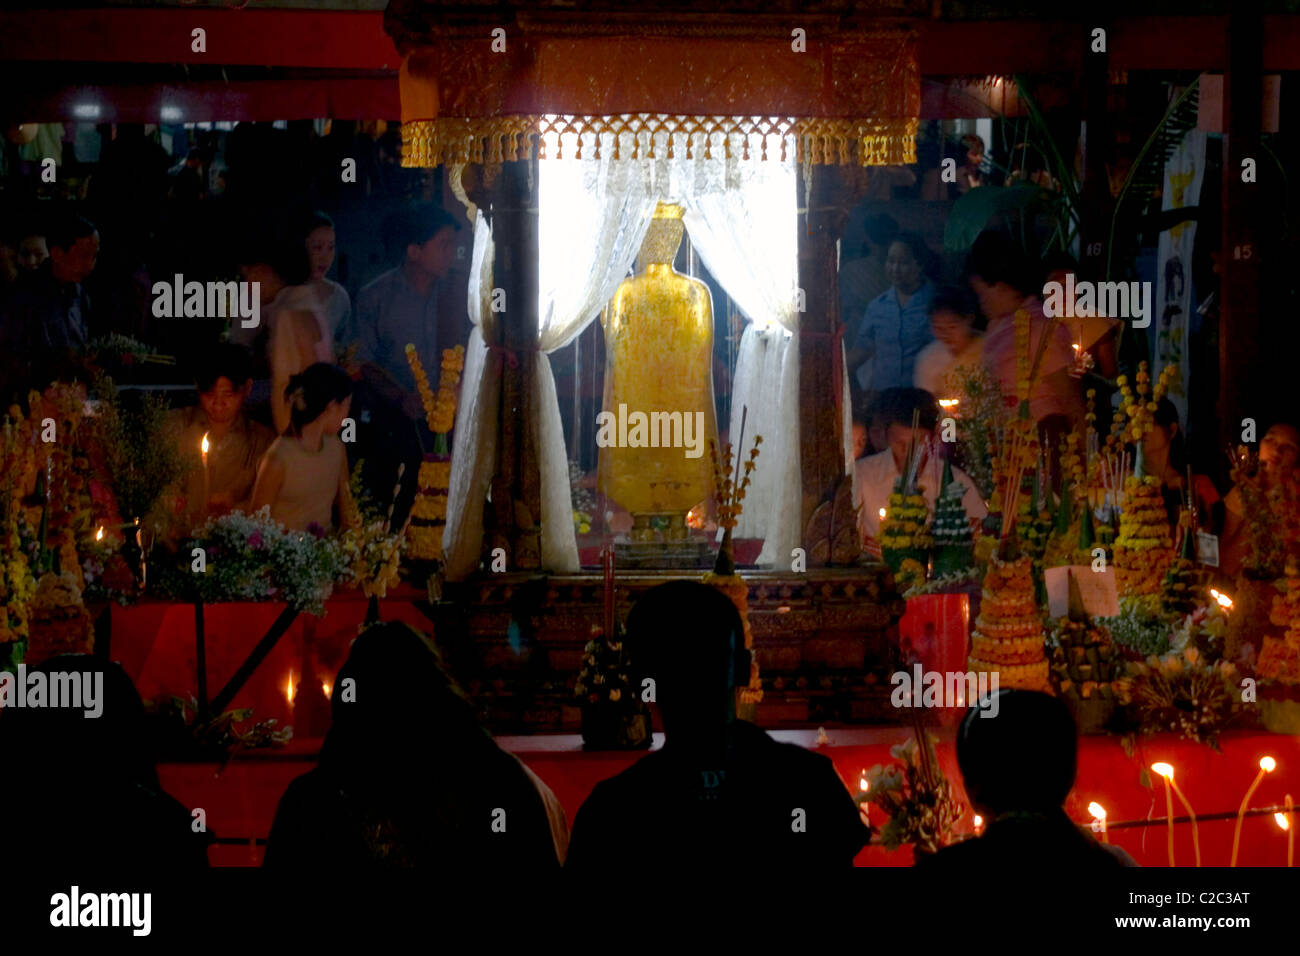 People are gathered with candles to pay tribute to the Pra Bang Buddha at a Buddhist temple in communist Laos. Stock Photo